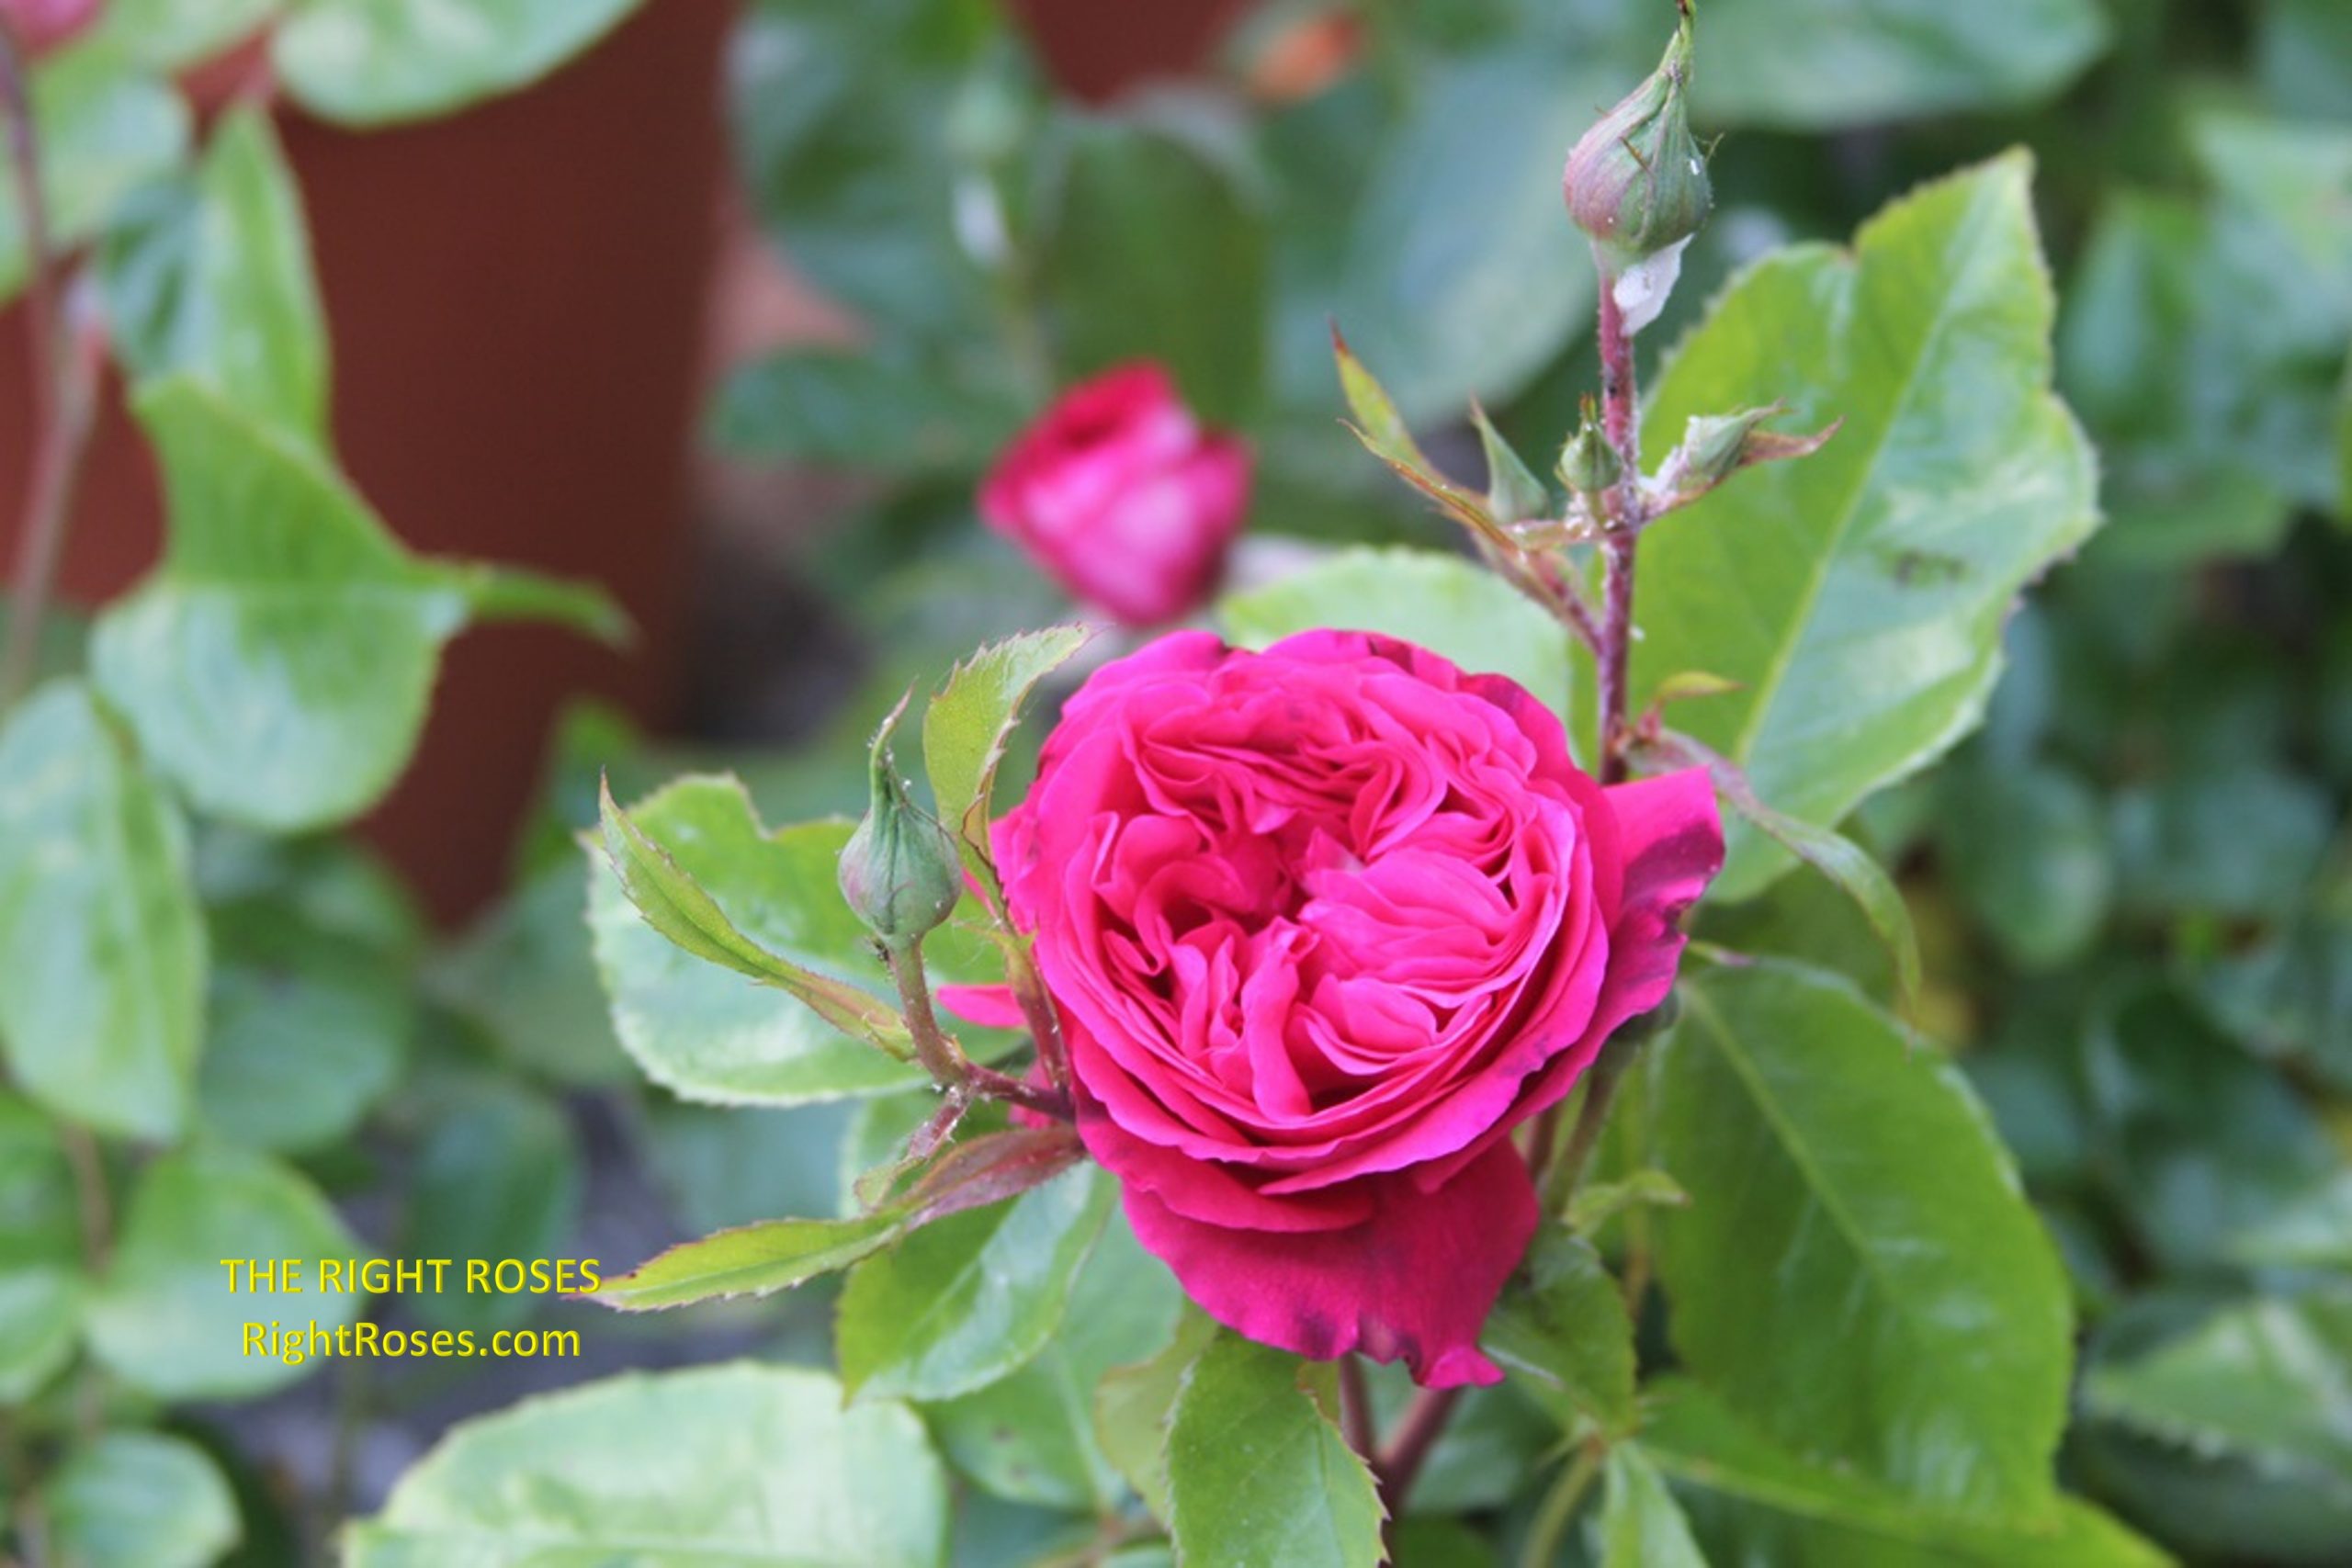 The Right Roses presents you with the best rose review of rose 'Maxim' | Rosen Tantau 2016. Millions of gardeners from all over the world have trusted our in-depth reviews. The Right Roses team uses our own, bespoke The Right Roses Score, which is the most comprehensive rose rating system in the world, to assess the overall quality of a rose. We review all the very best roses from all the best rose breeders such as Rosen Kordes, Rosen Tantau, Delbard, David Austin Roses. The Right Roses is also running the best gardening club for the very best connoisseur gardeners and garden designers at Righttify.com. At Righttify.com, connoisseur sellers can design gardens, provide gardening services, gardening courses, and provide garden consulting services.